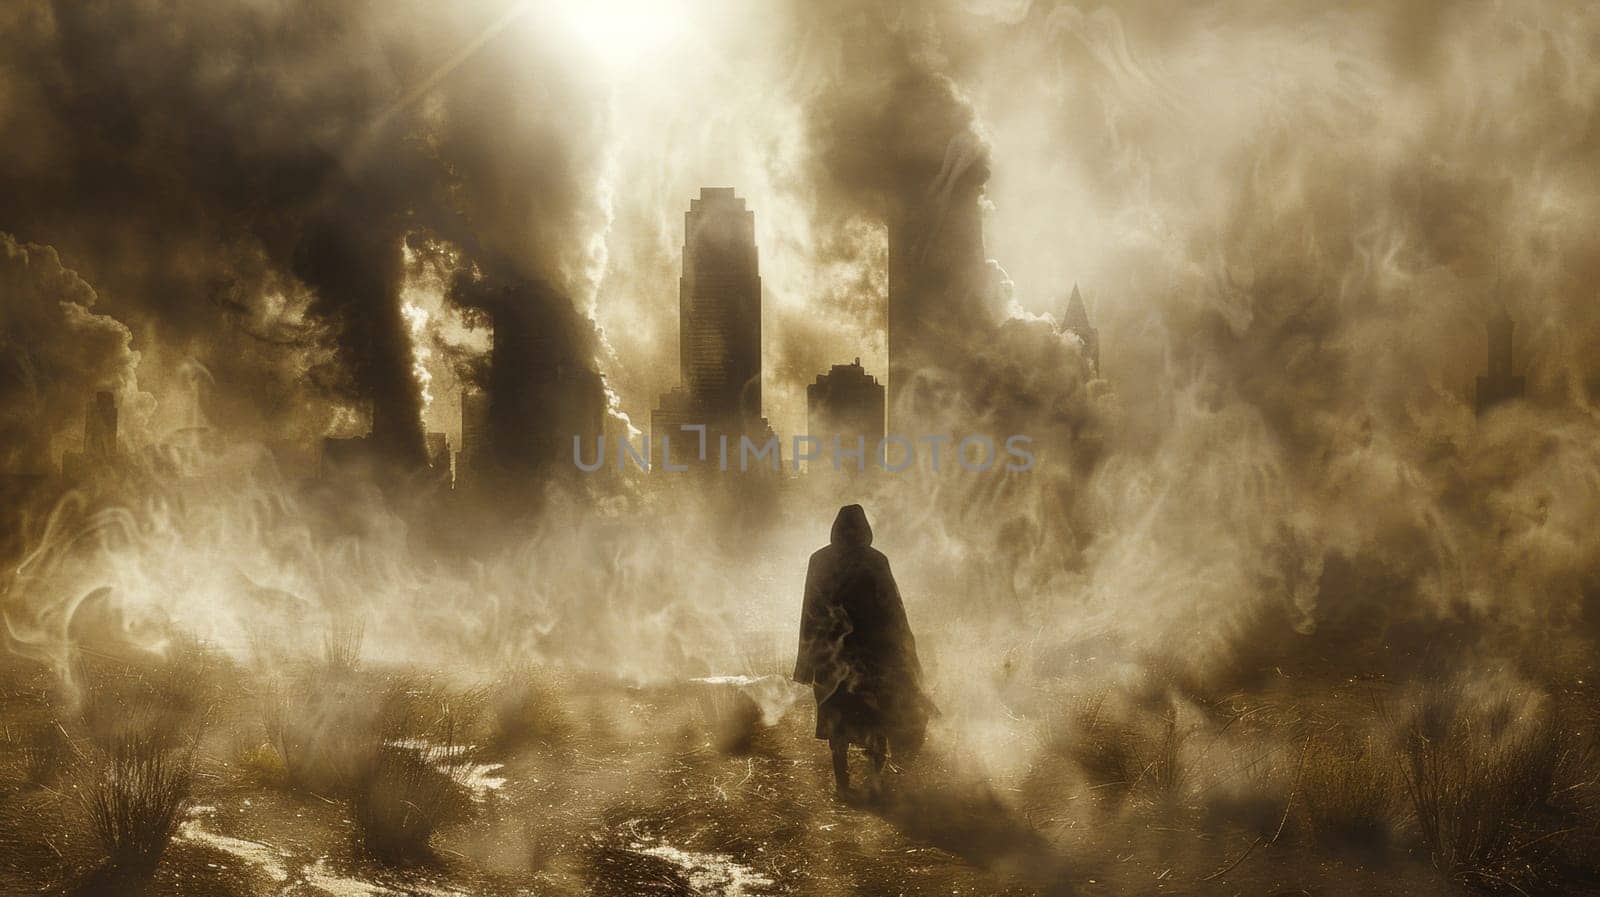 A man walking through a city with smoke and buildings in the background